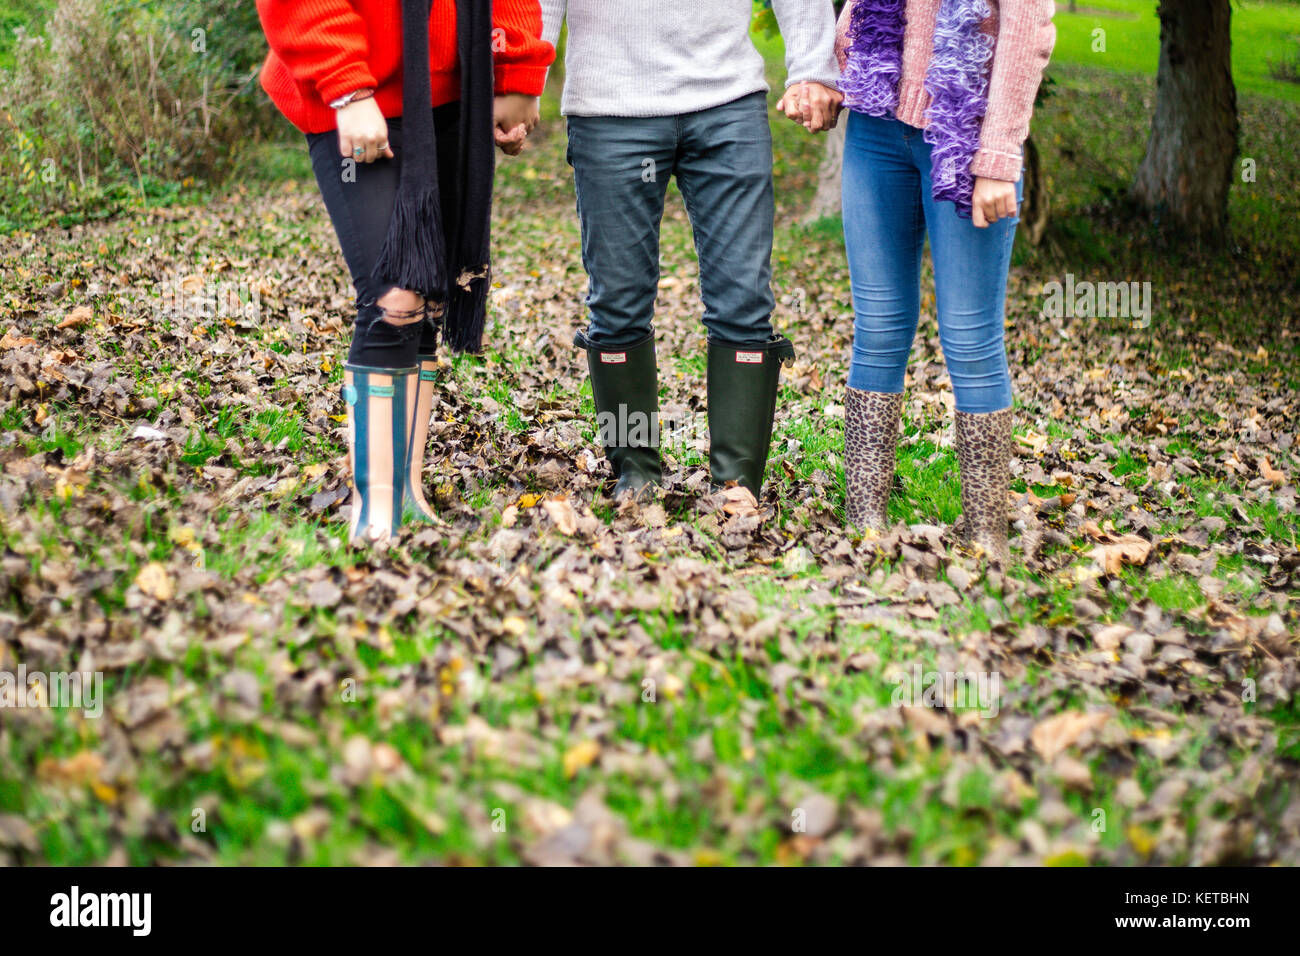 three people kicking leaves in woodland / park Stock Photo